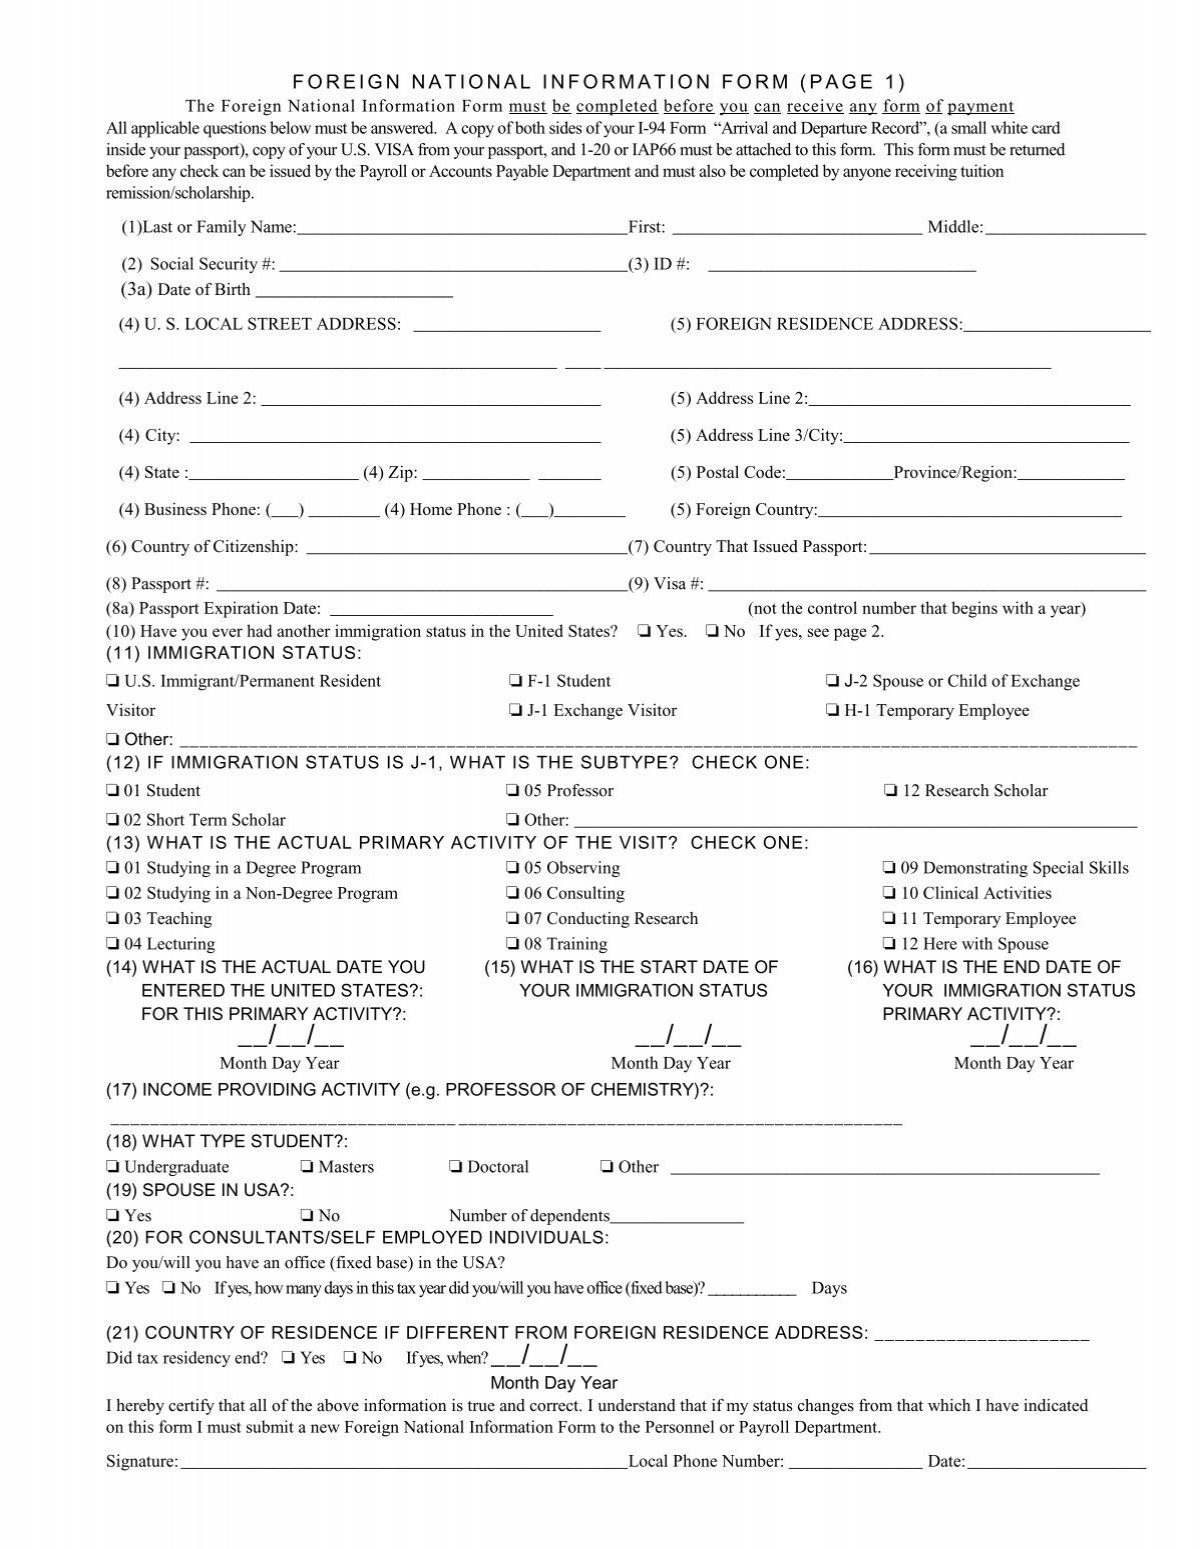 FOREIGN NATIONAL INFORMATION FORM PAGE 1 